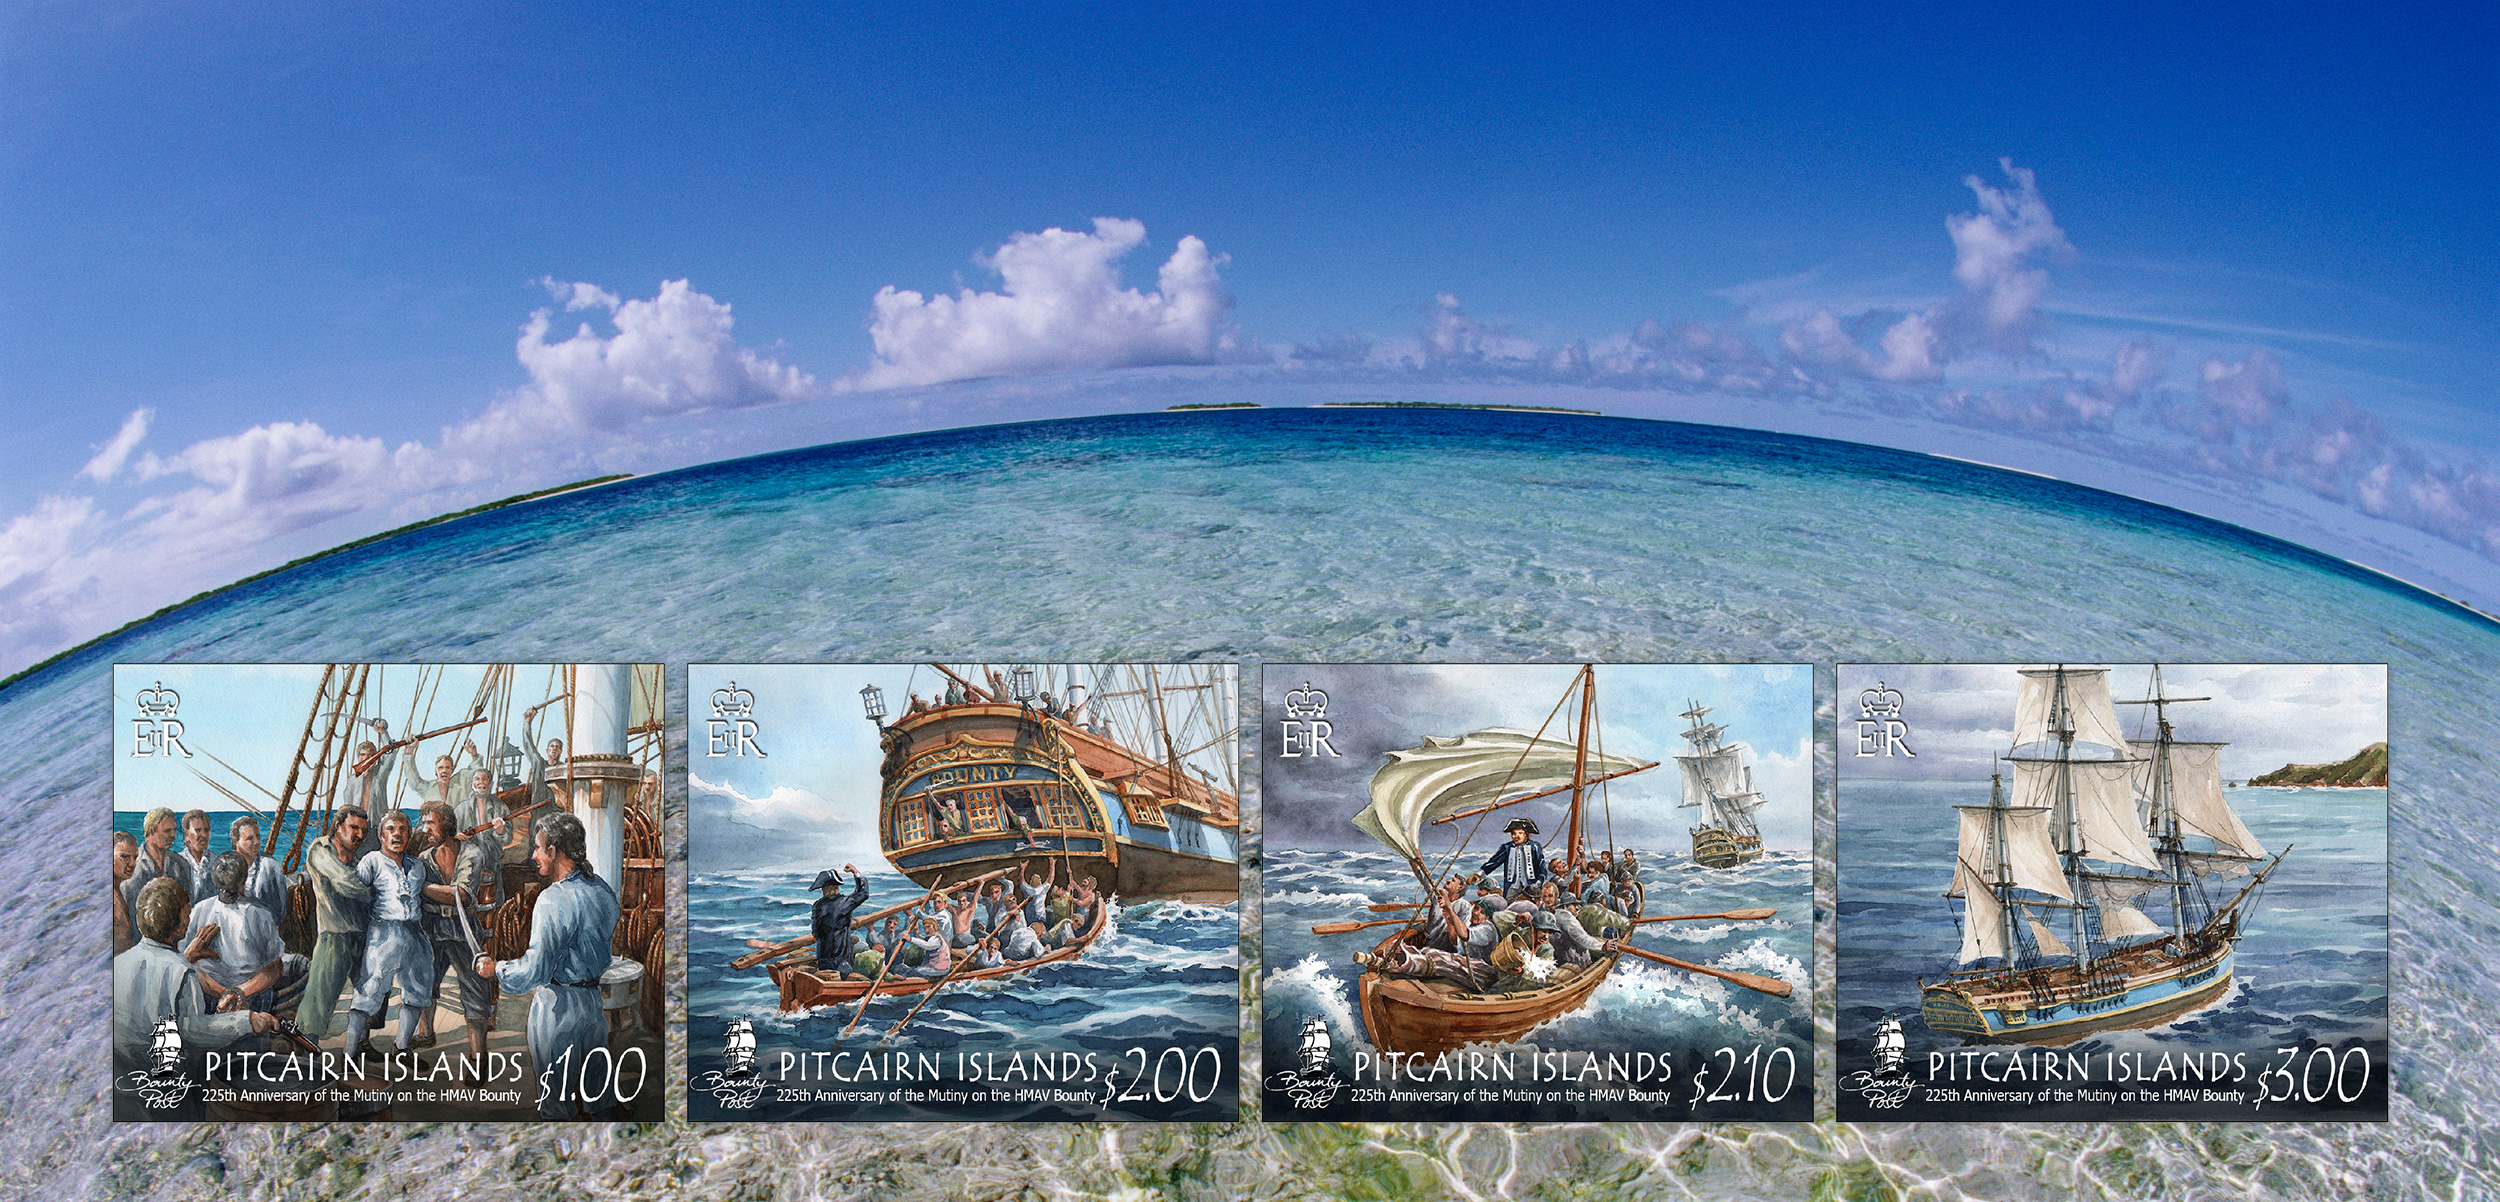 These four postage stamps depict the anchoring moments in one of the most extraordinary events in maritime history: the mutiny aboard HMS Bounty. Background photo by Darrell Gulin/Corbis